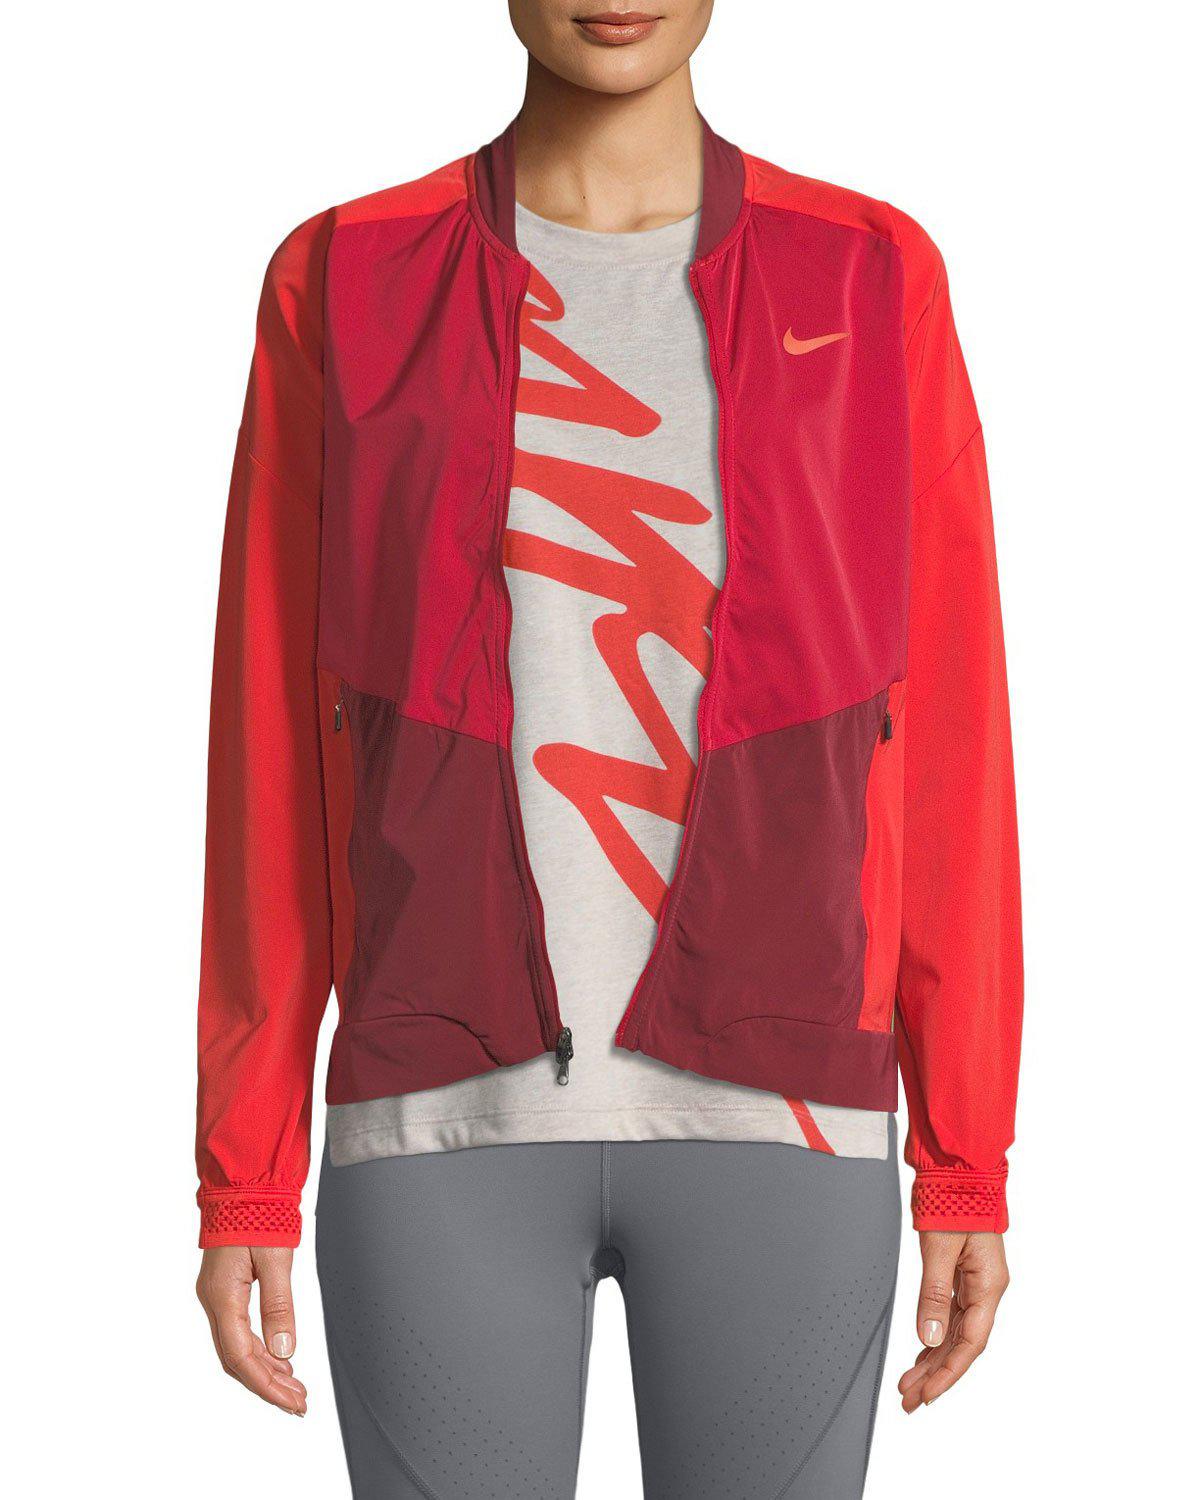 Download Nike Synthetic Stadium Zip-front Running Jacket in Red ...